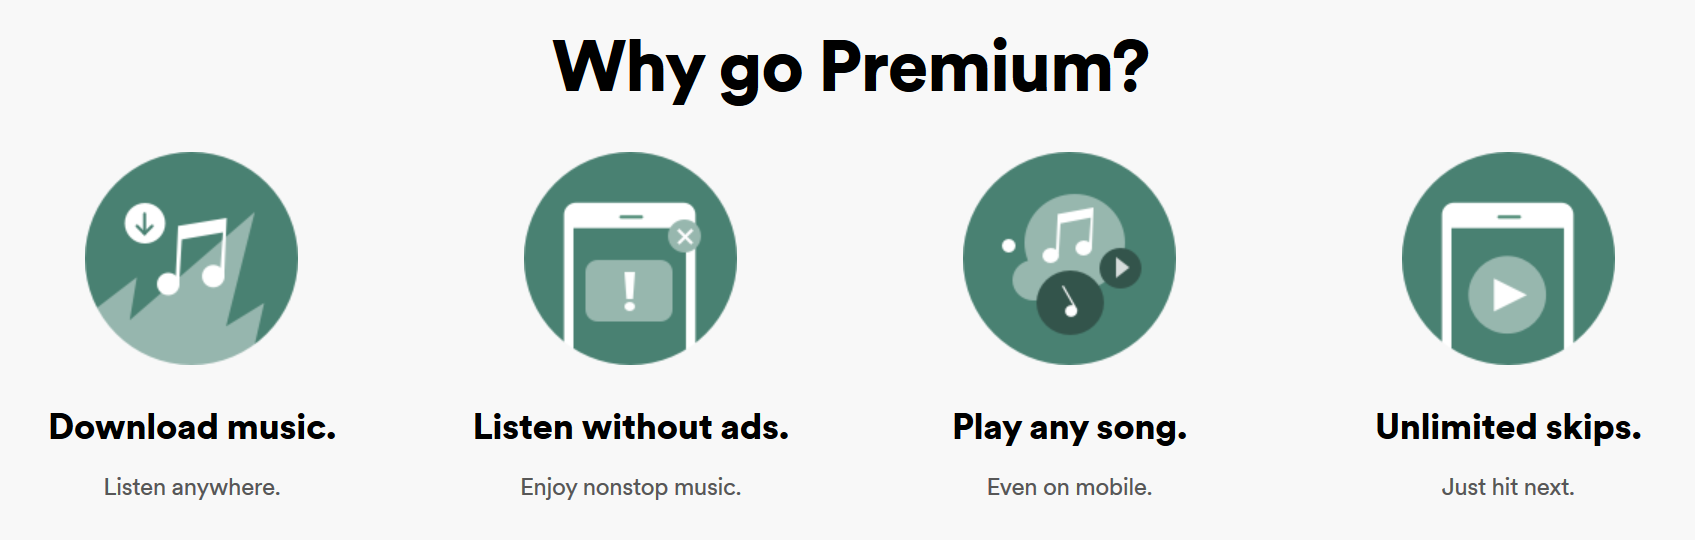 Spotify's premium service offers more features than its ad-supported tier - Apple fights back against Spotify claiming the music streamer's data is out of tune